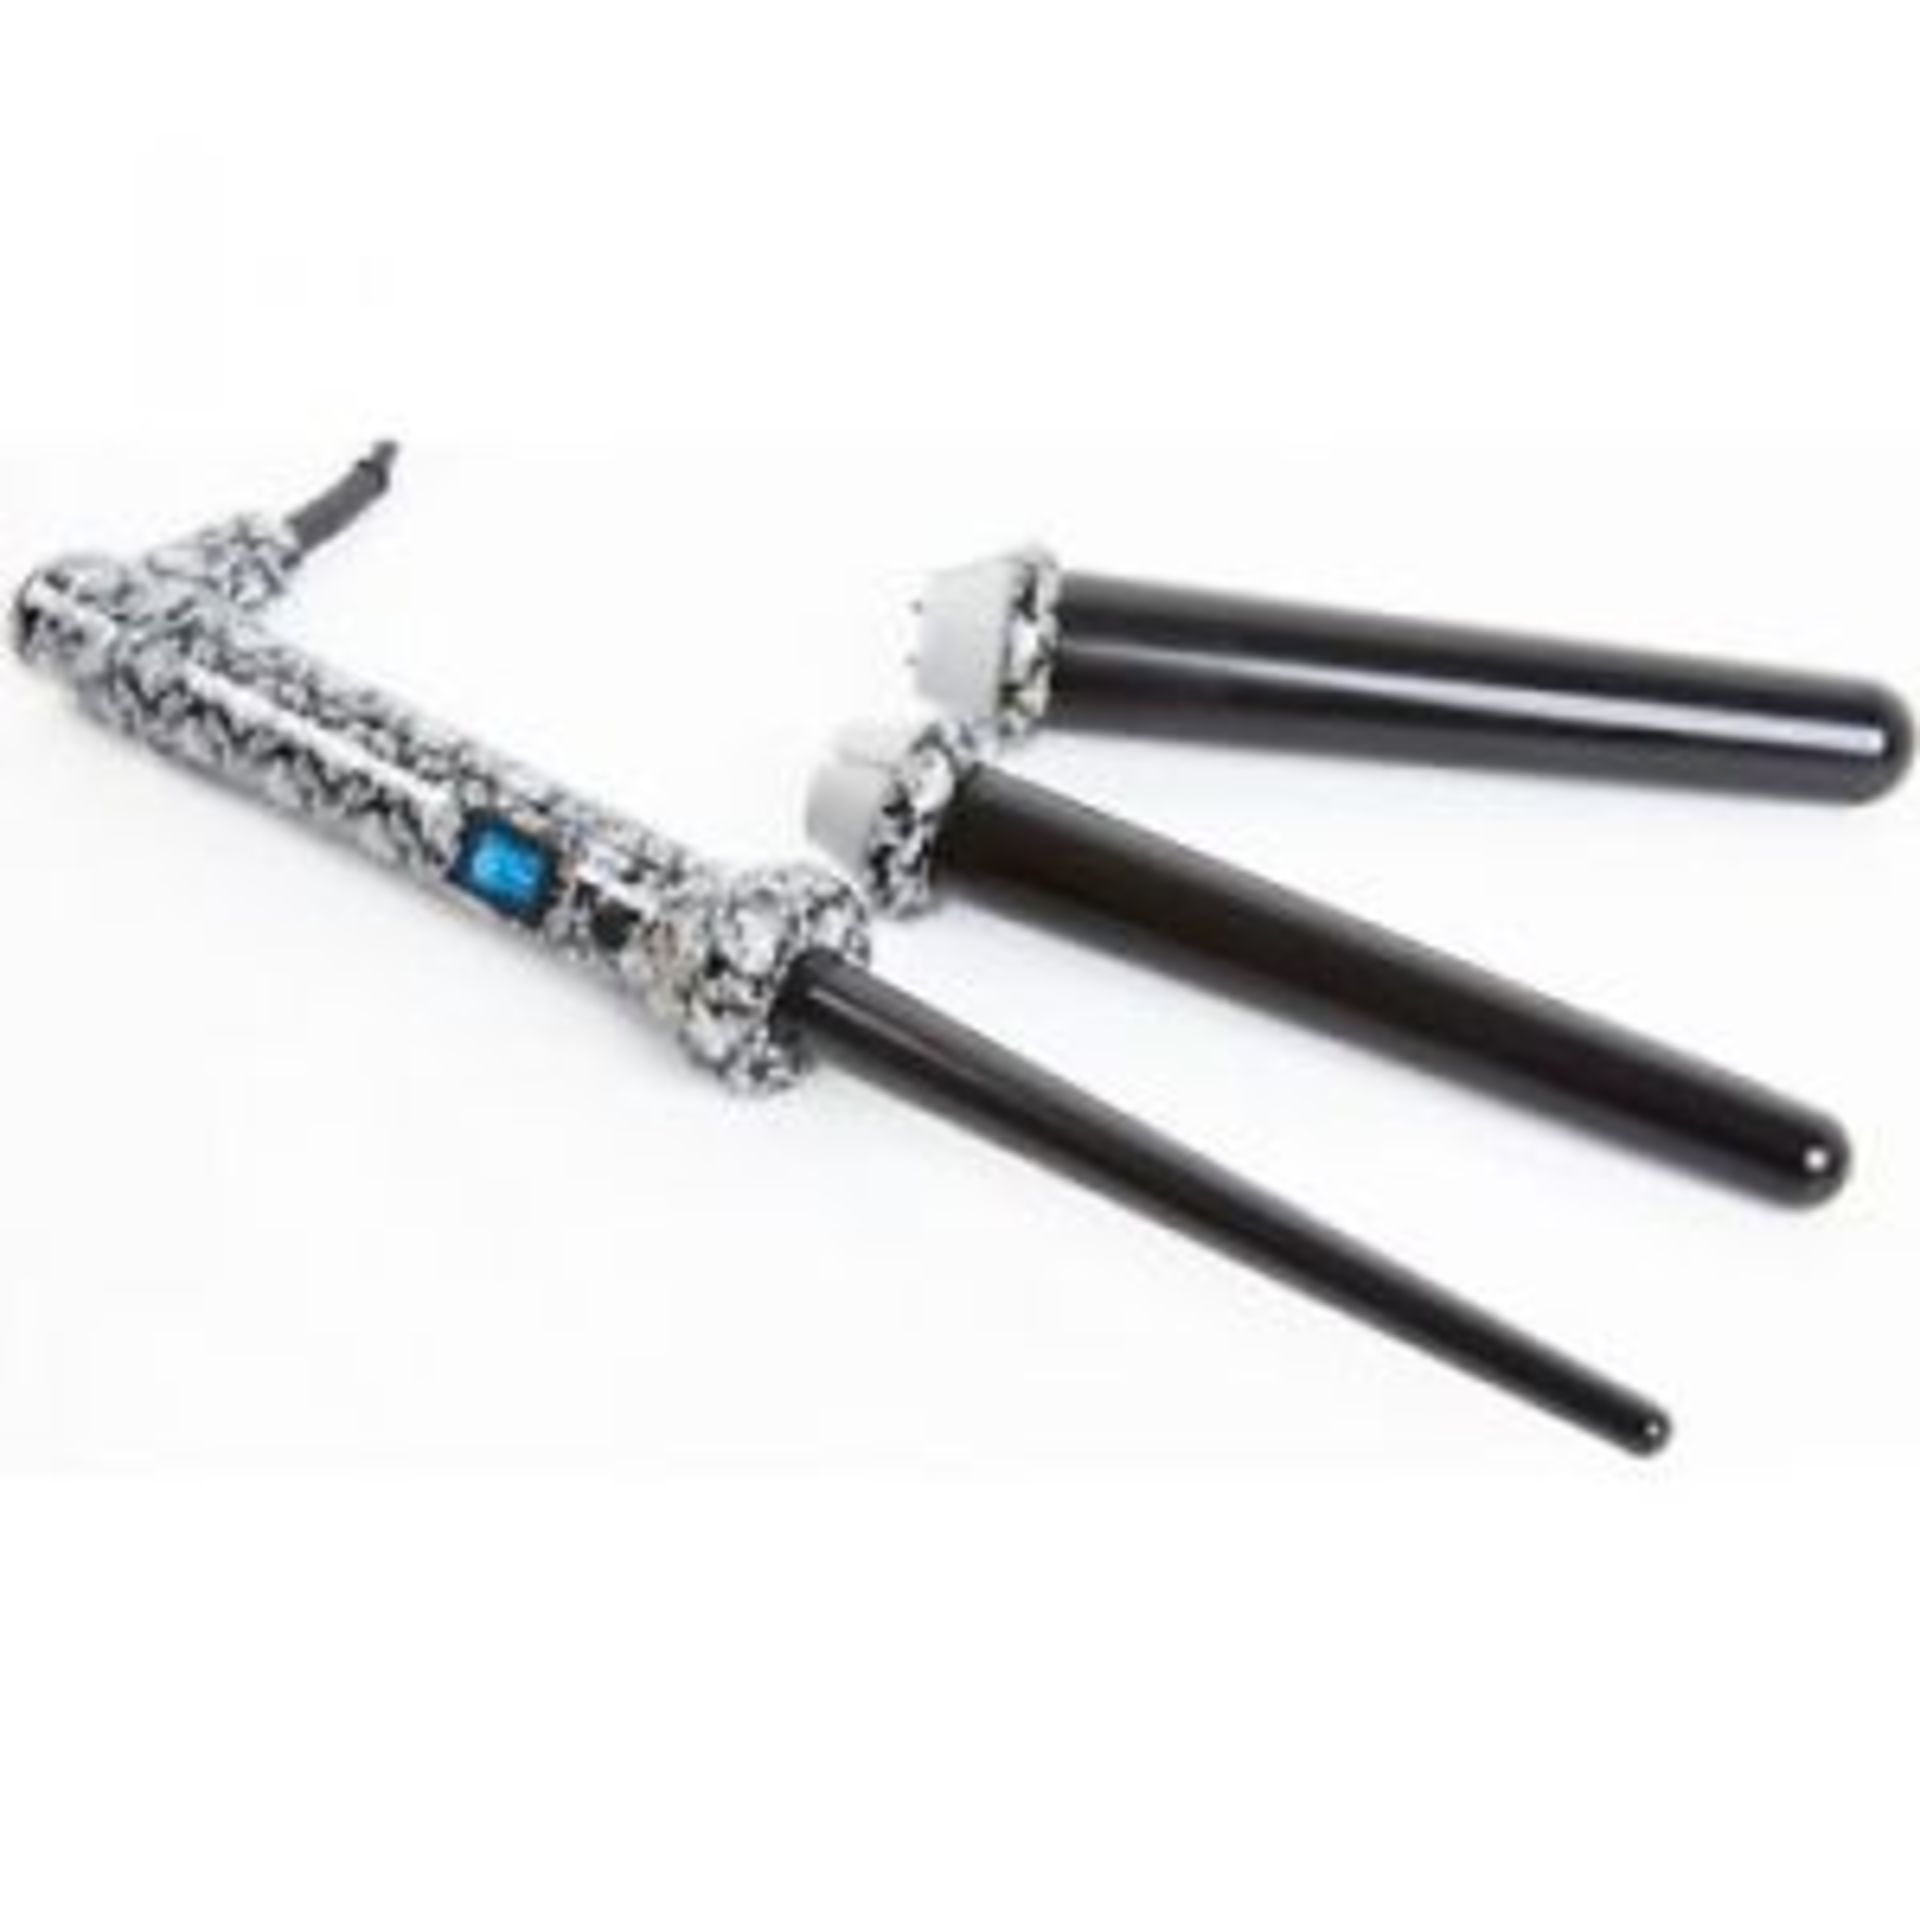 V *TRADE QTY* Brand New Yogi Hair Wand 3-In-1 Styler With Tourmaline & Ceranic Barrels Includes Wand